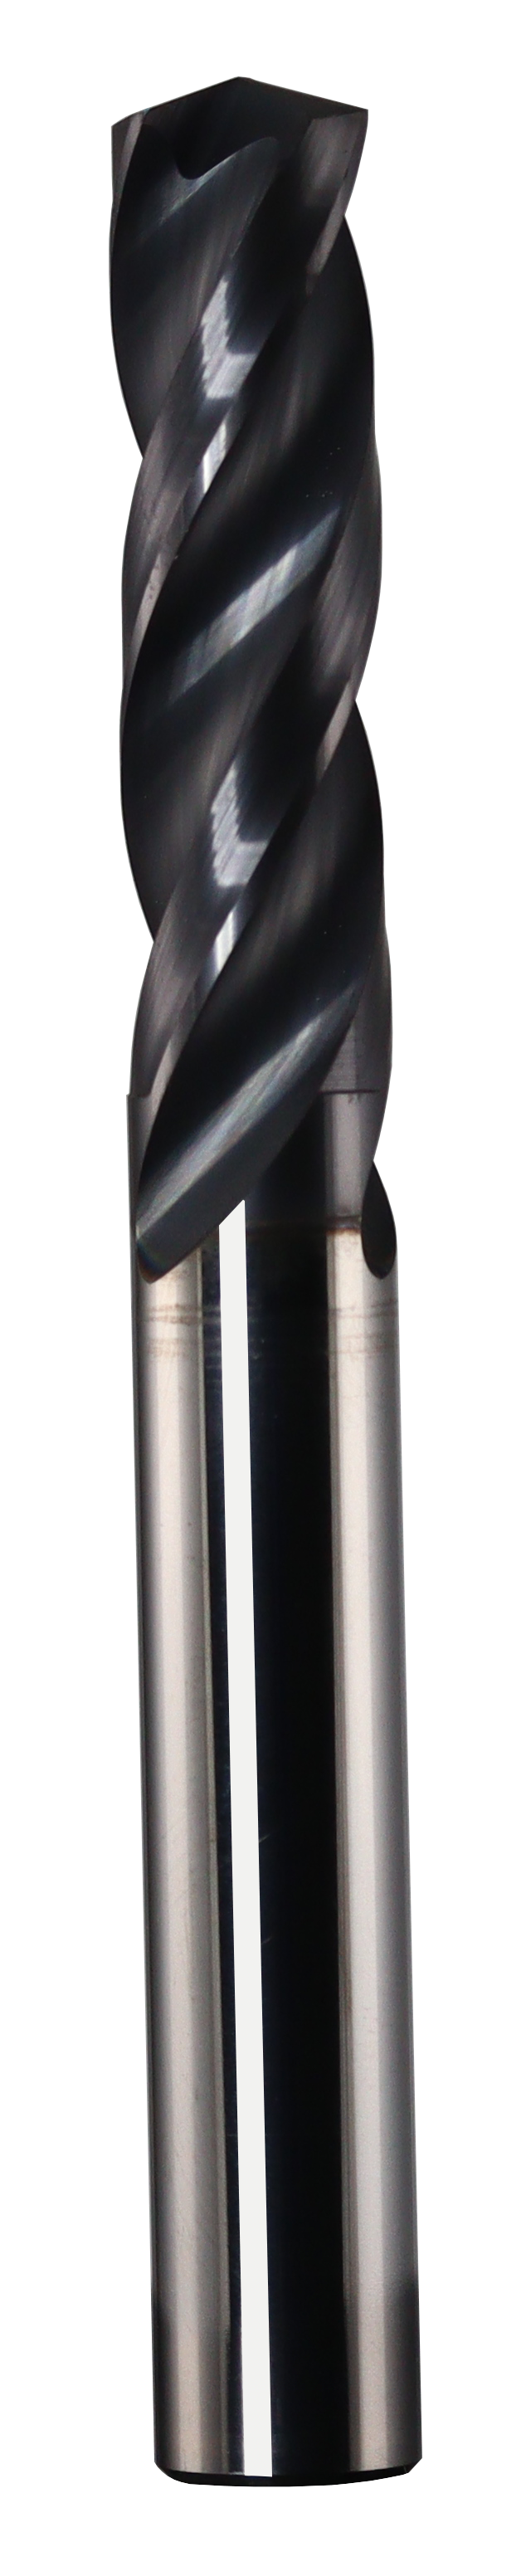 9.20mm Dia, 150 Degree Point, Solid Carbide Drill - 69027